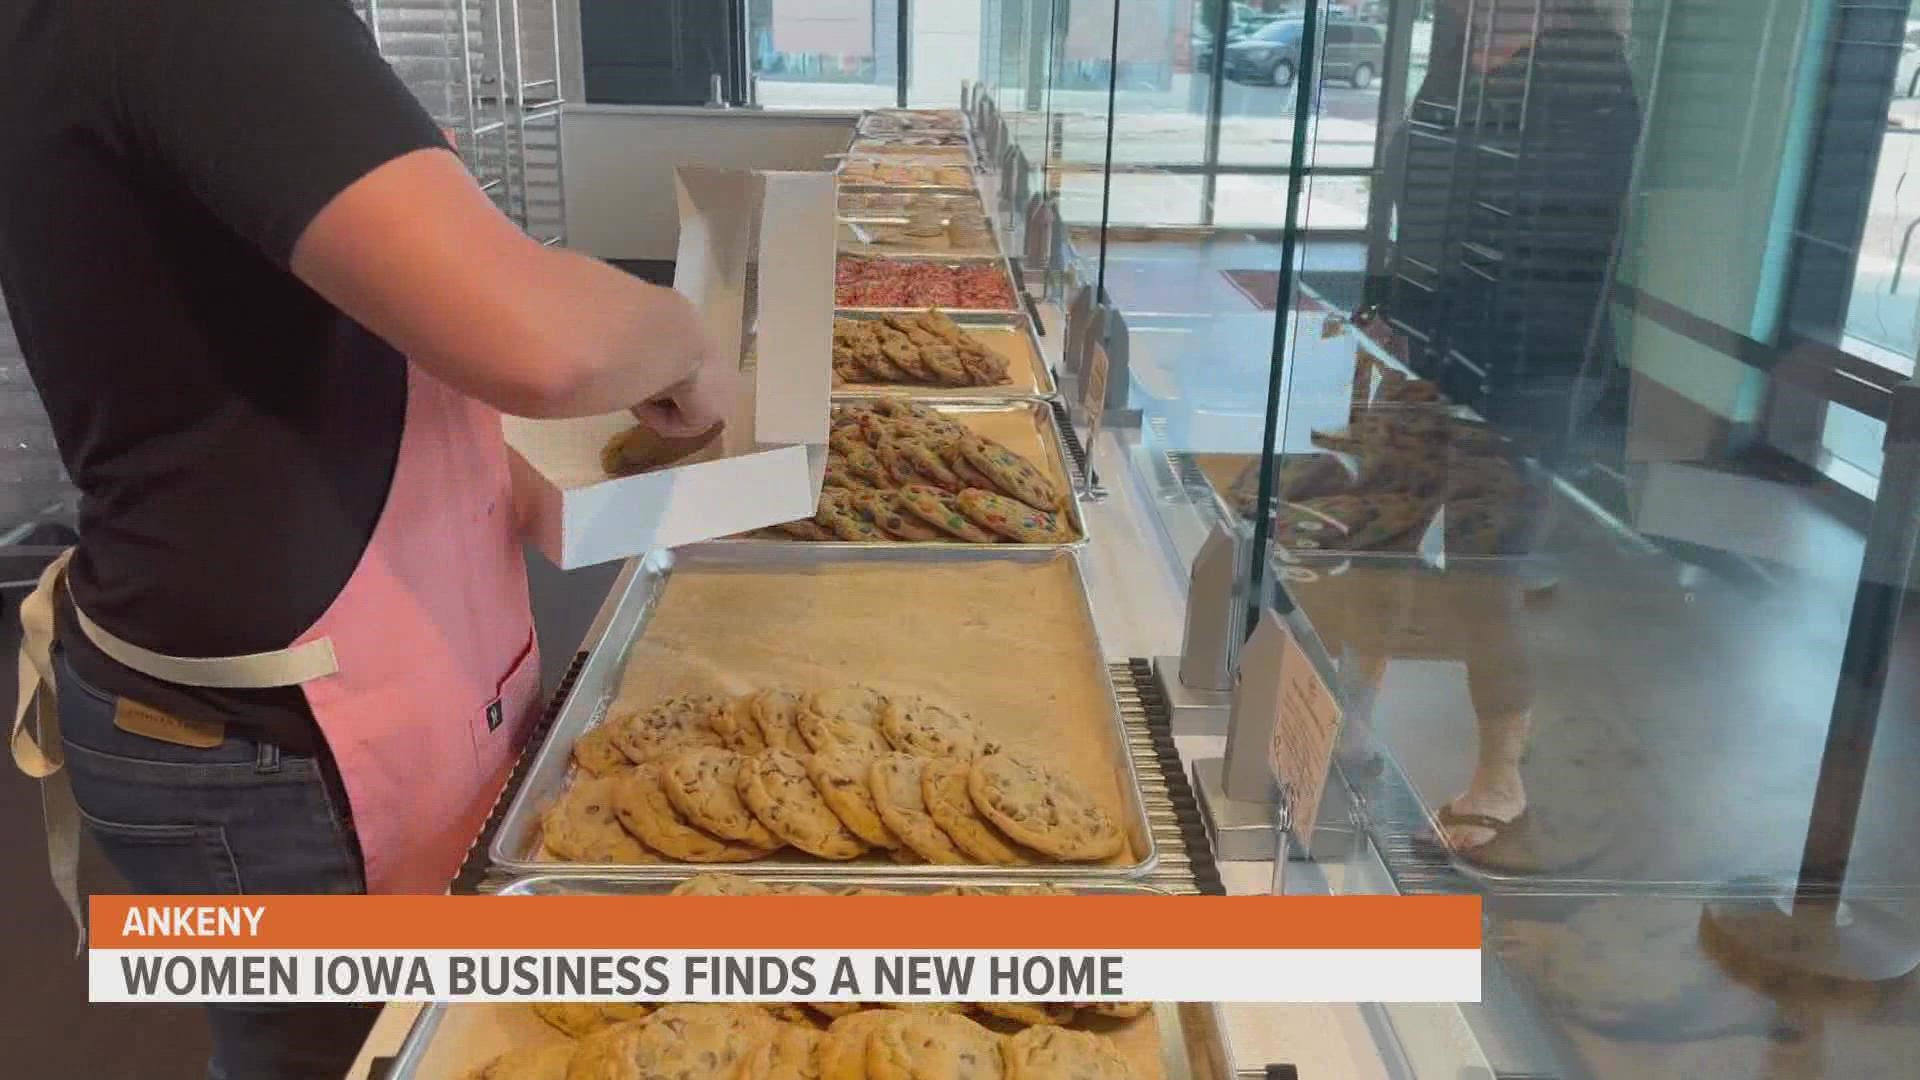 The business got its start after founder Stephanie Sellers took her dream of baking and introduced it at her restaurant, where it was a hit.